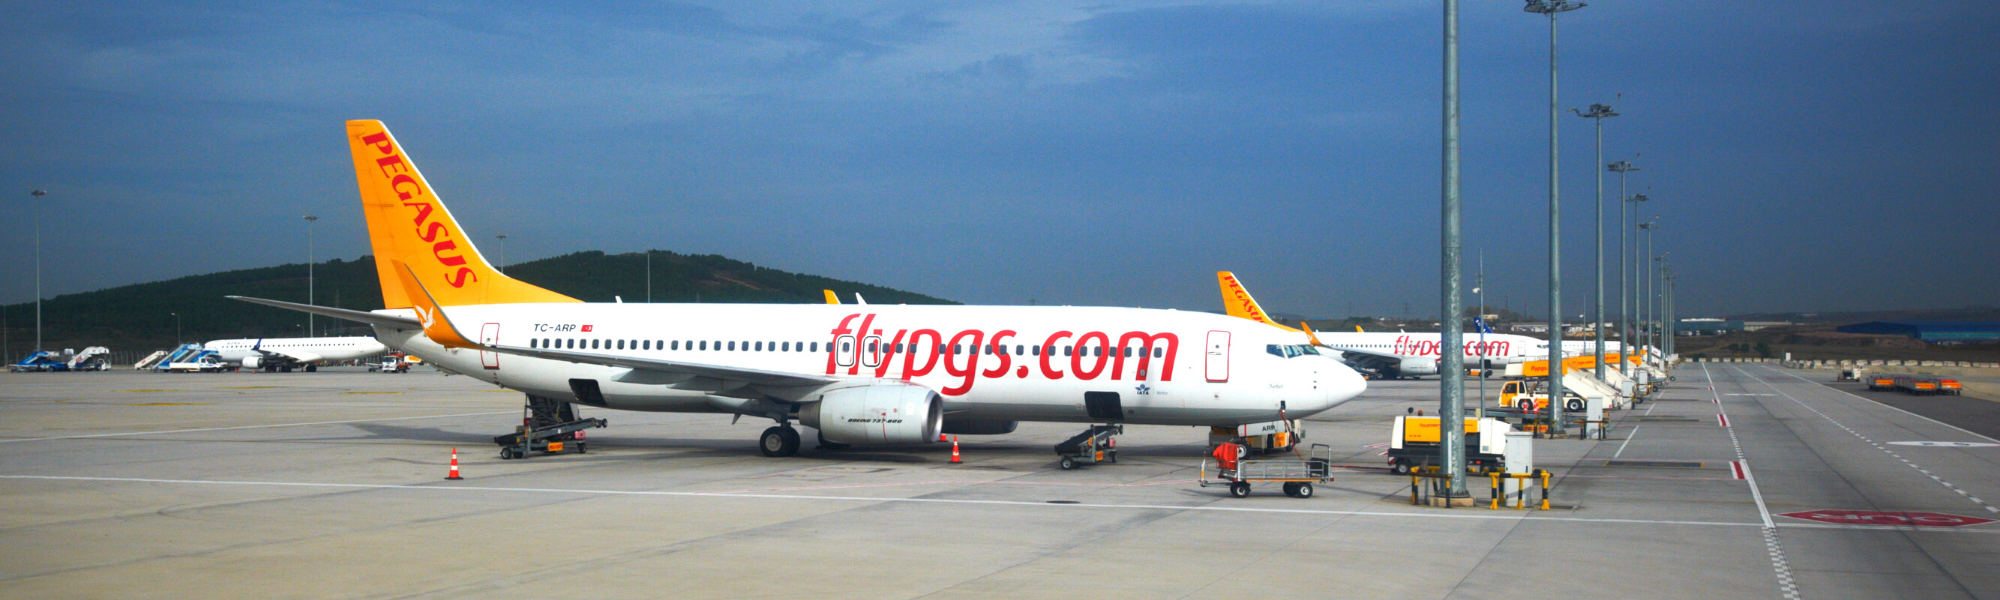 GOOSE Recruitment Partners With Pegasus Airlines